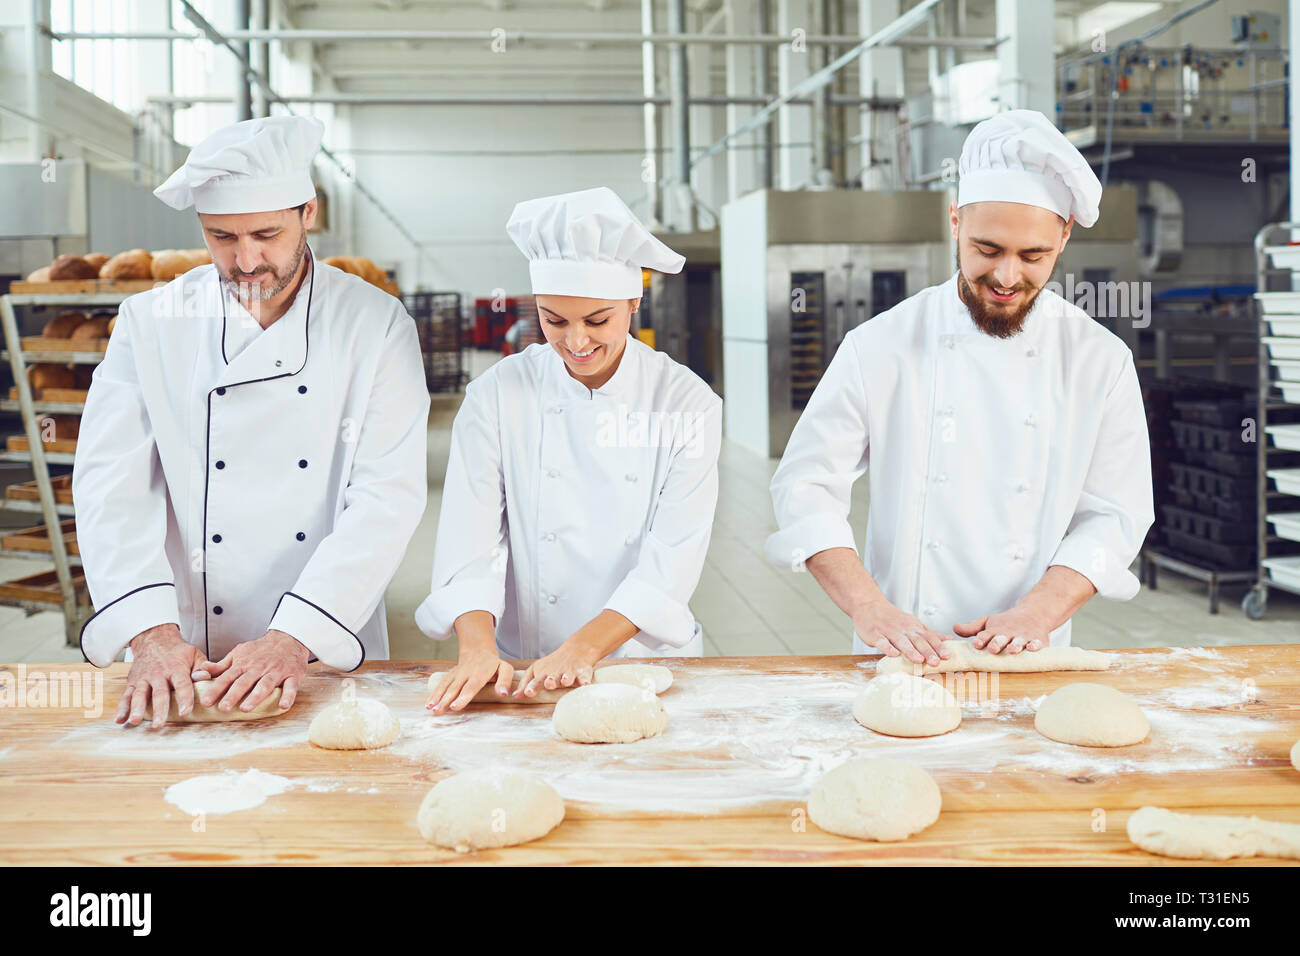 baker weighing bread dough on scale at bakery Stock Photo - Alamy